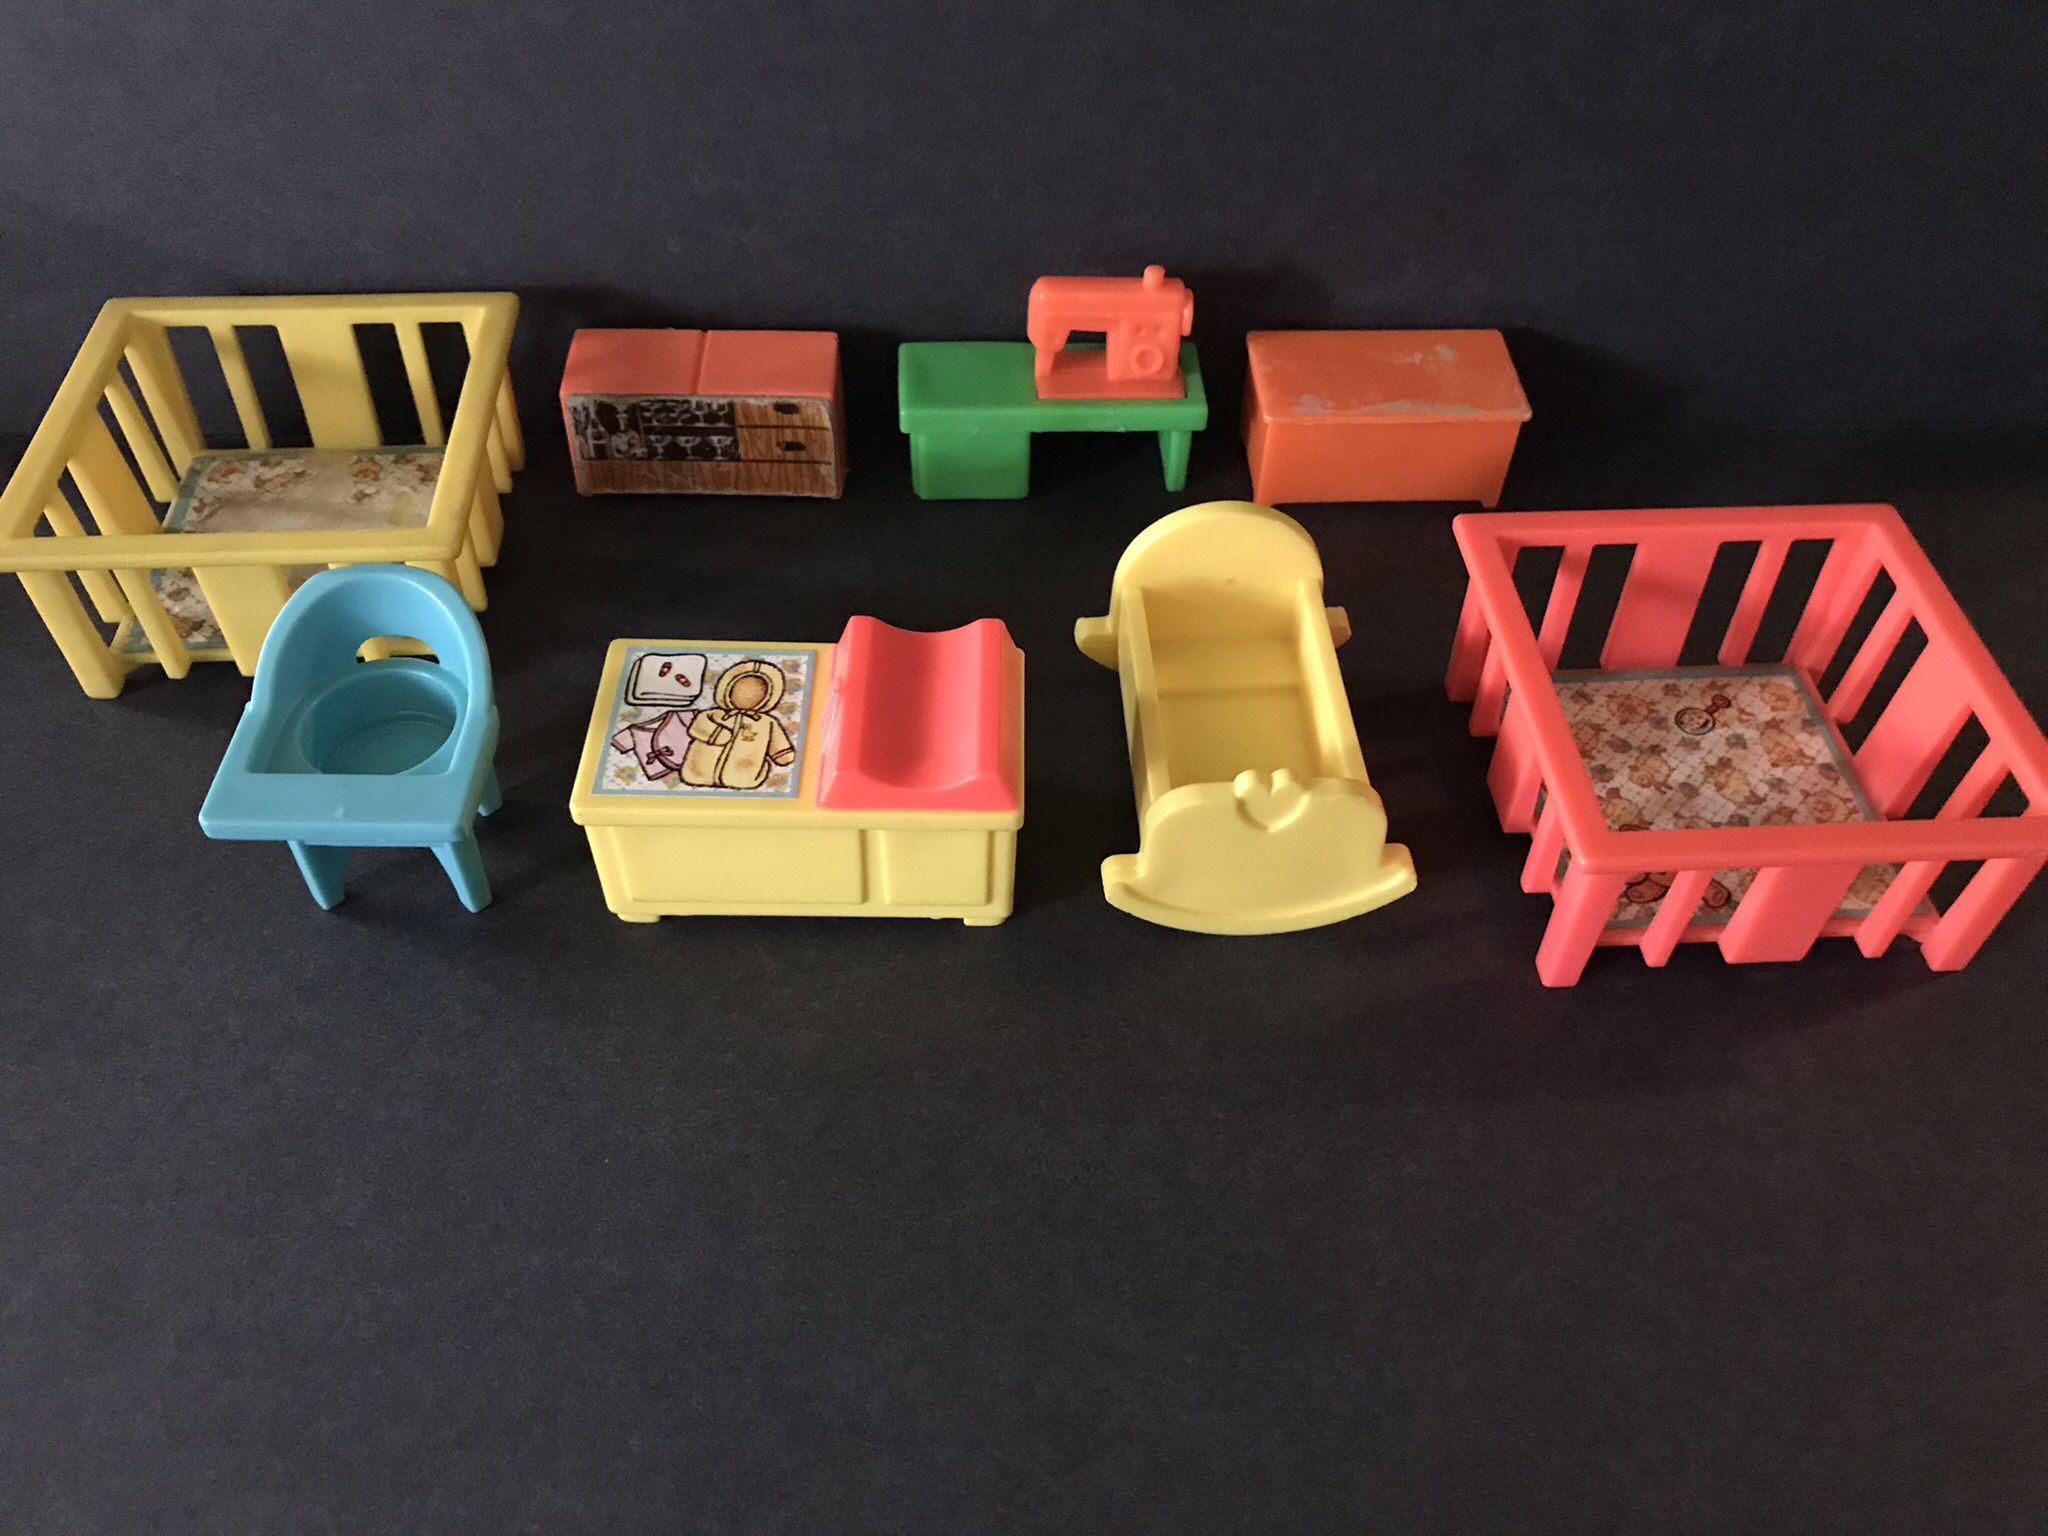 Vintage Fisher Price Little People Accessories $20